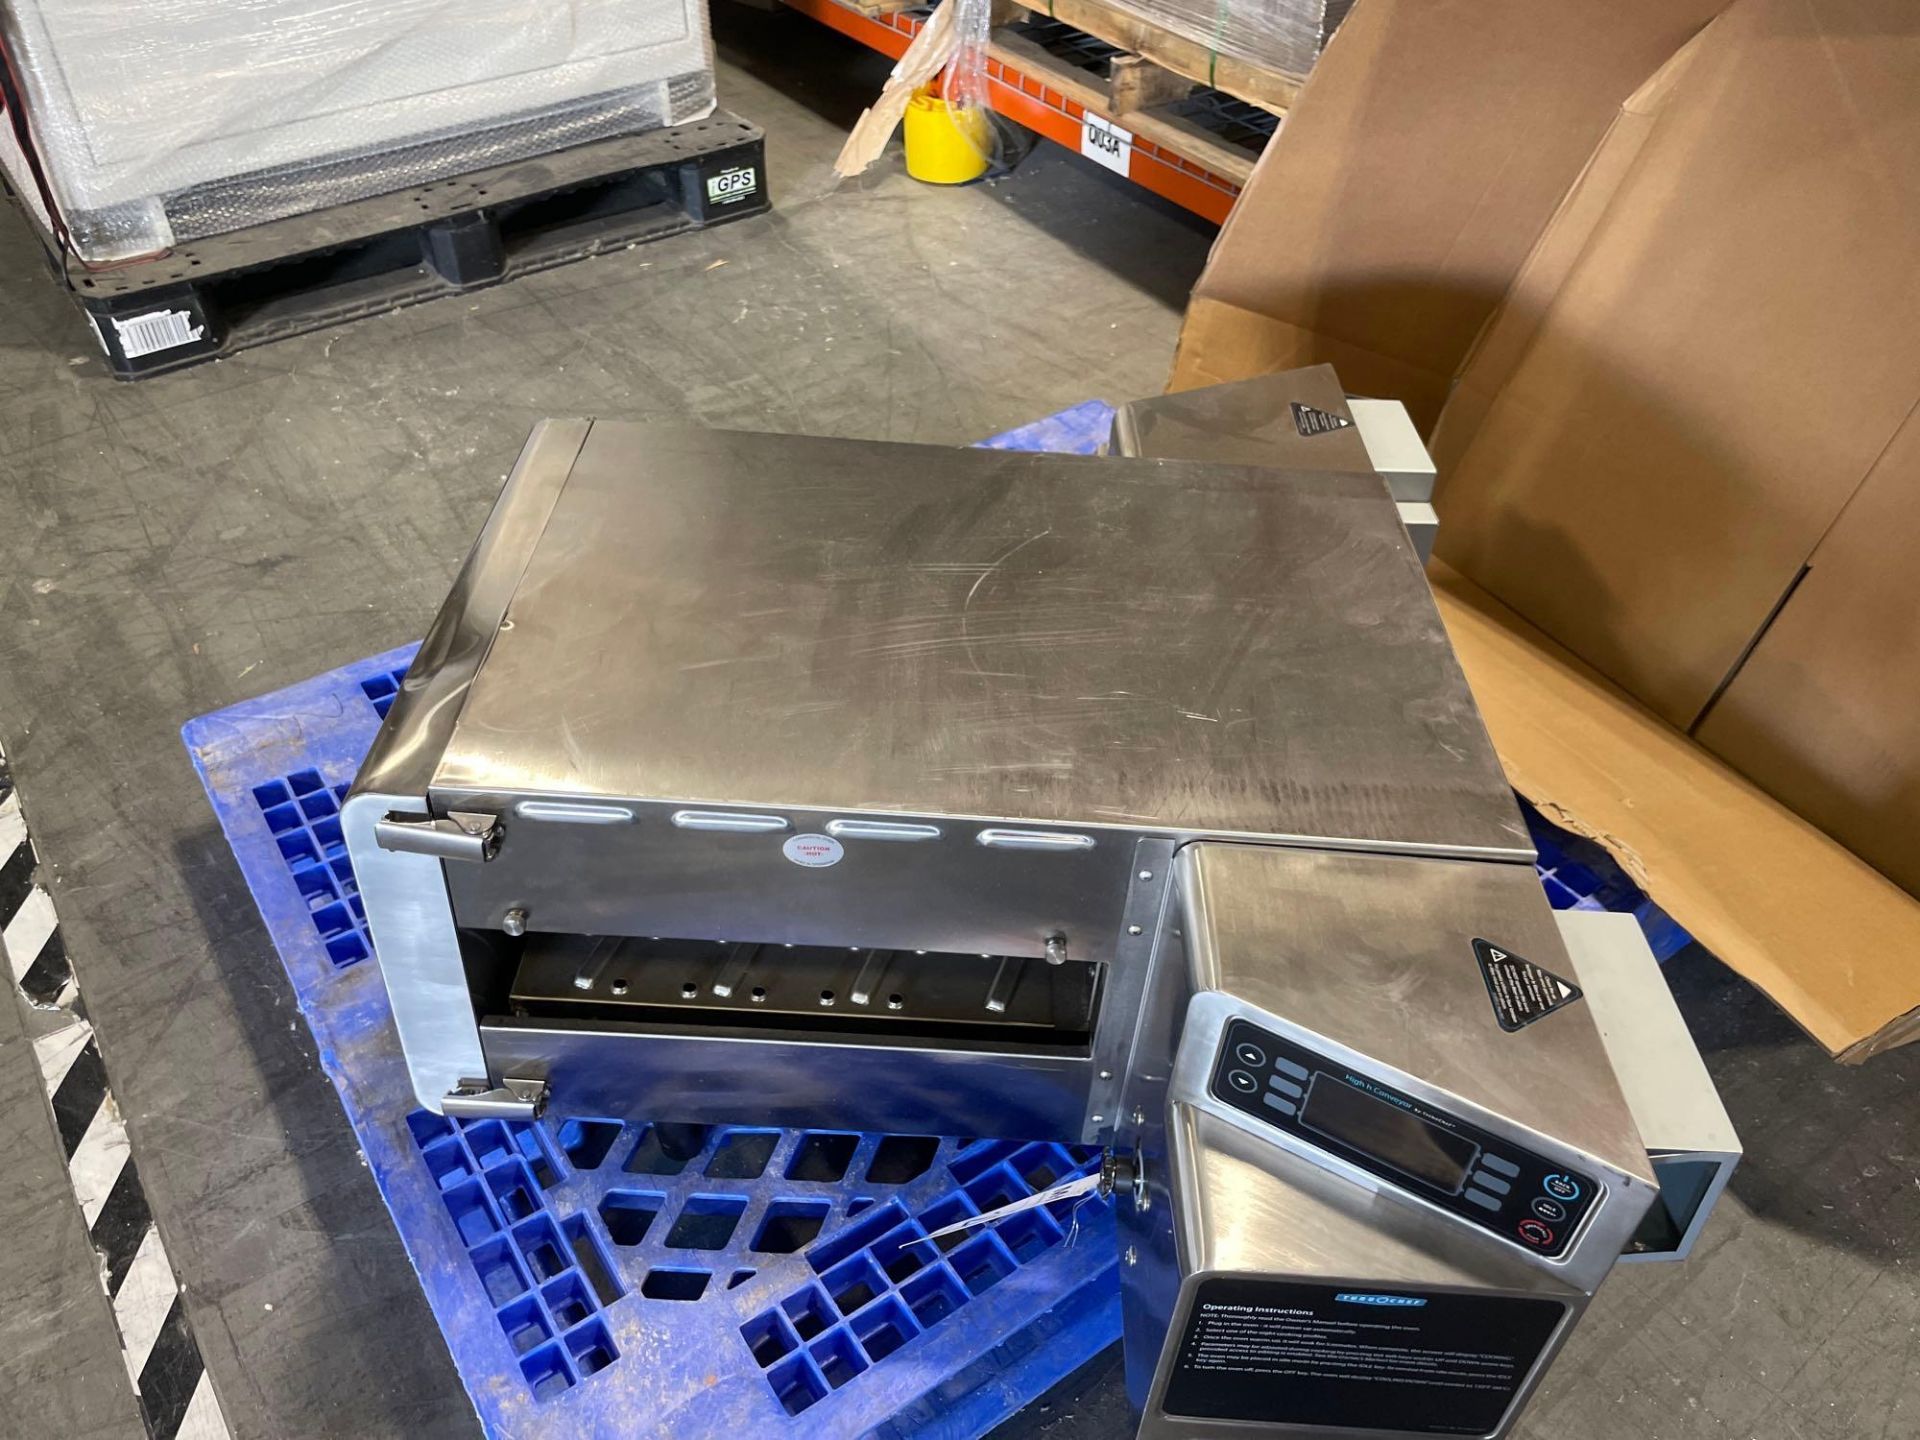 TURBOCHEF HCS1618 Industrial Oven w/ Conveyor System, 2019 - Image 2 of 7